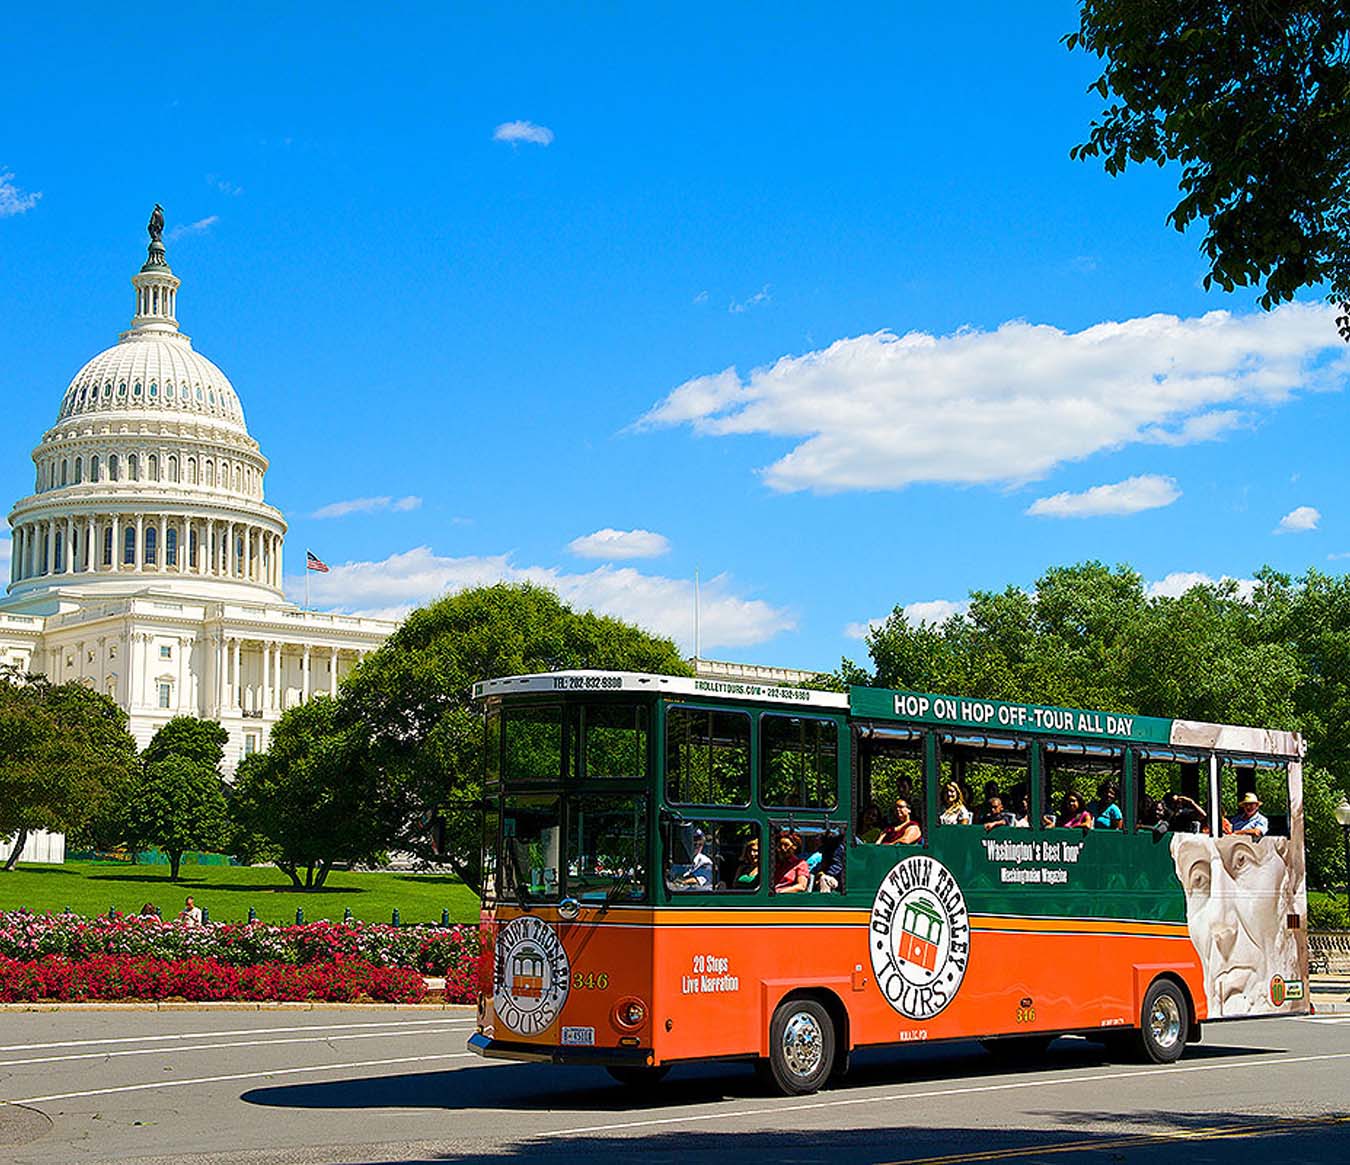 Things to Do in Washington - Hop-On Hop-Off Tour